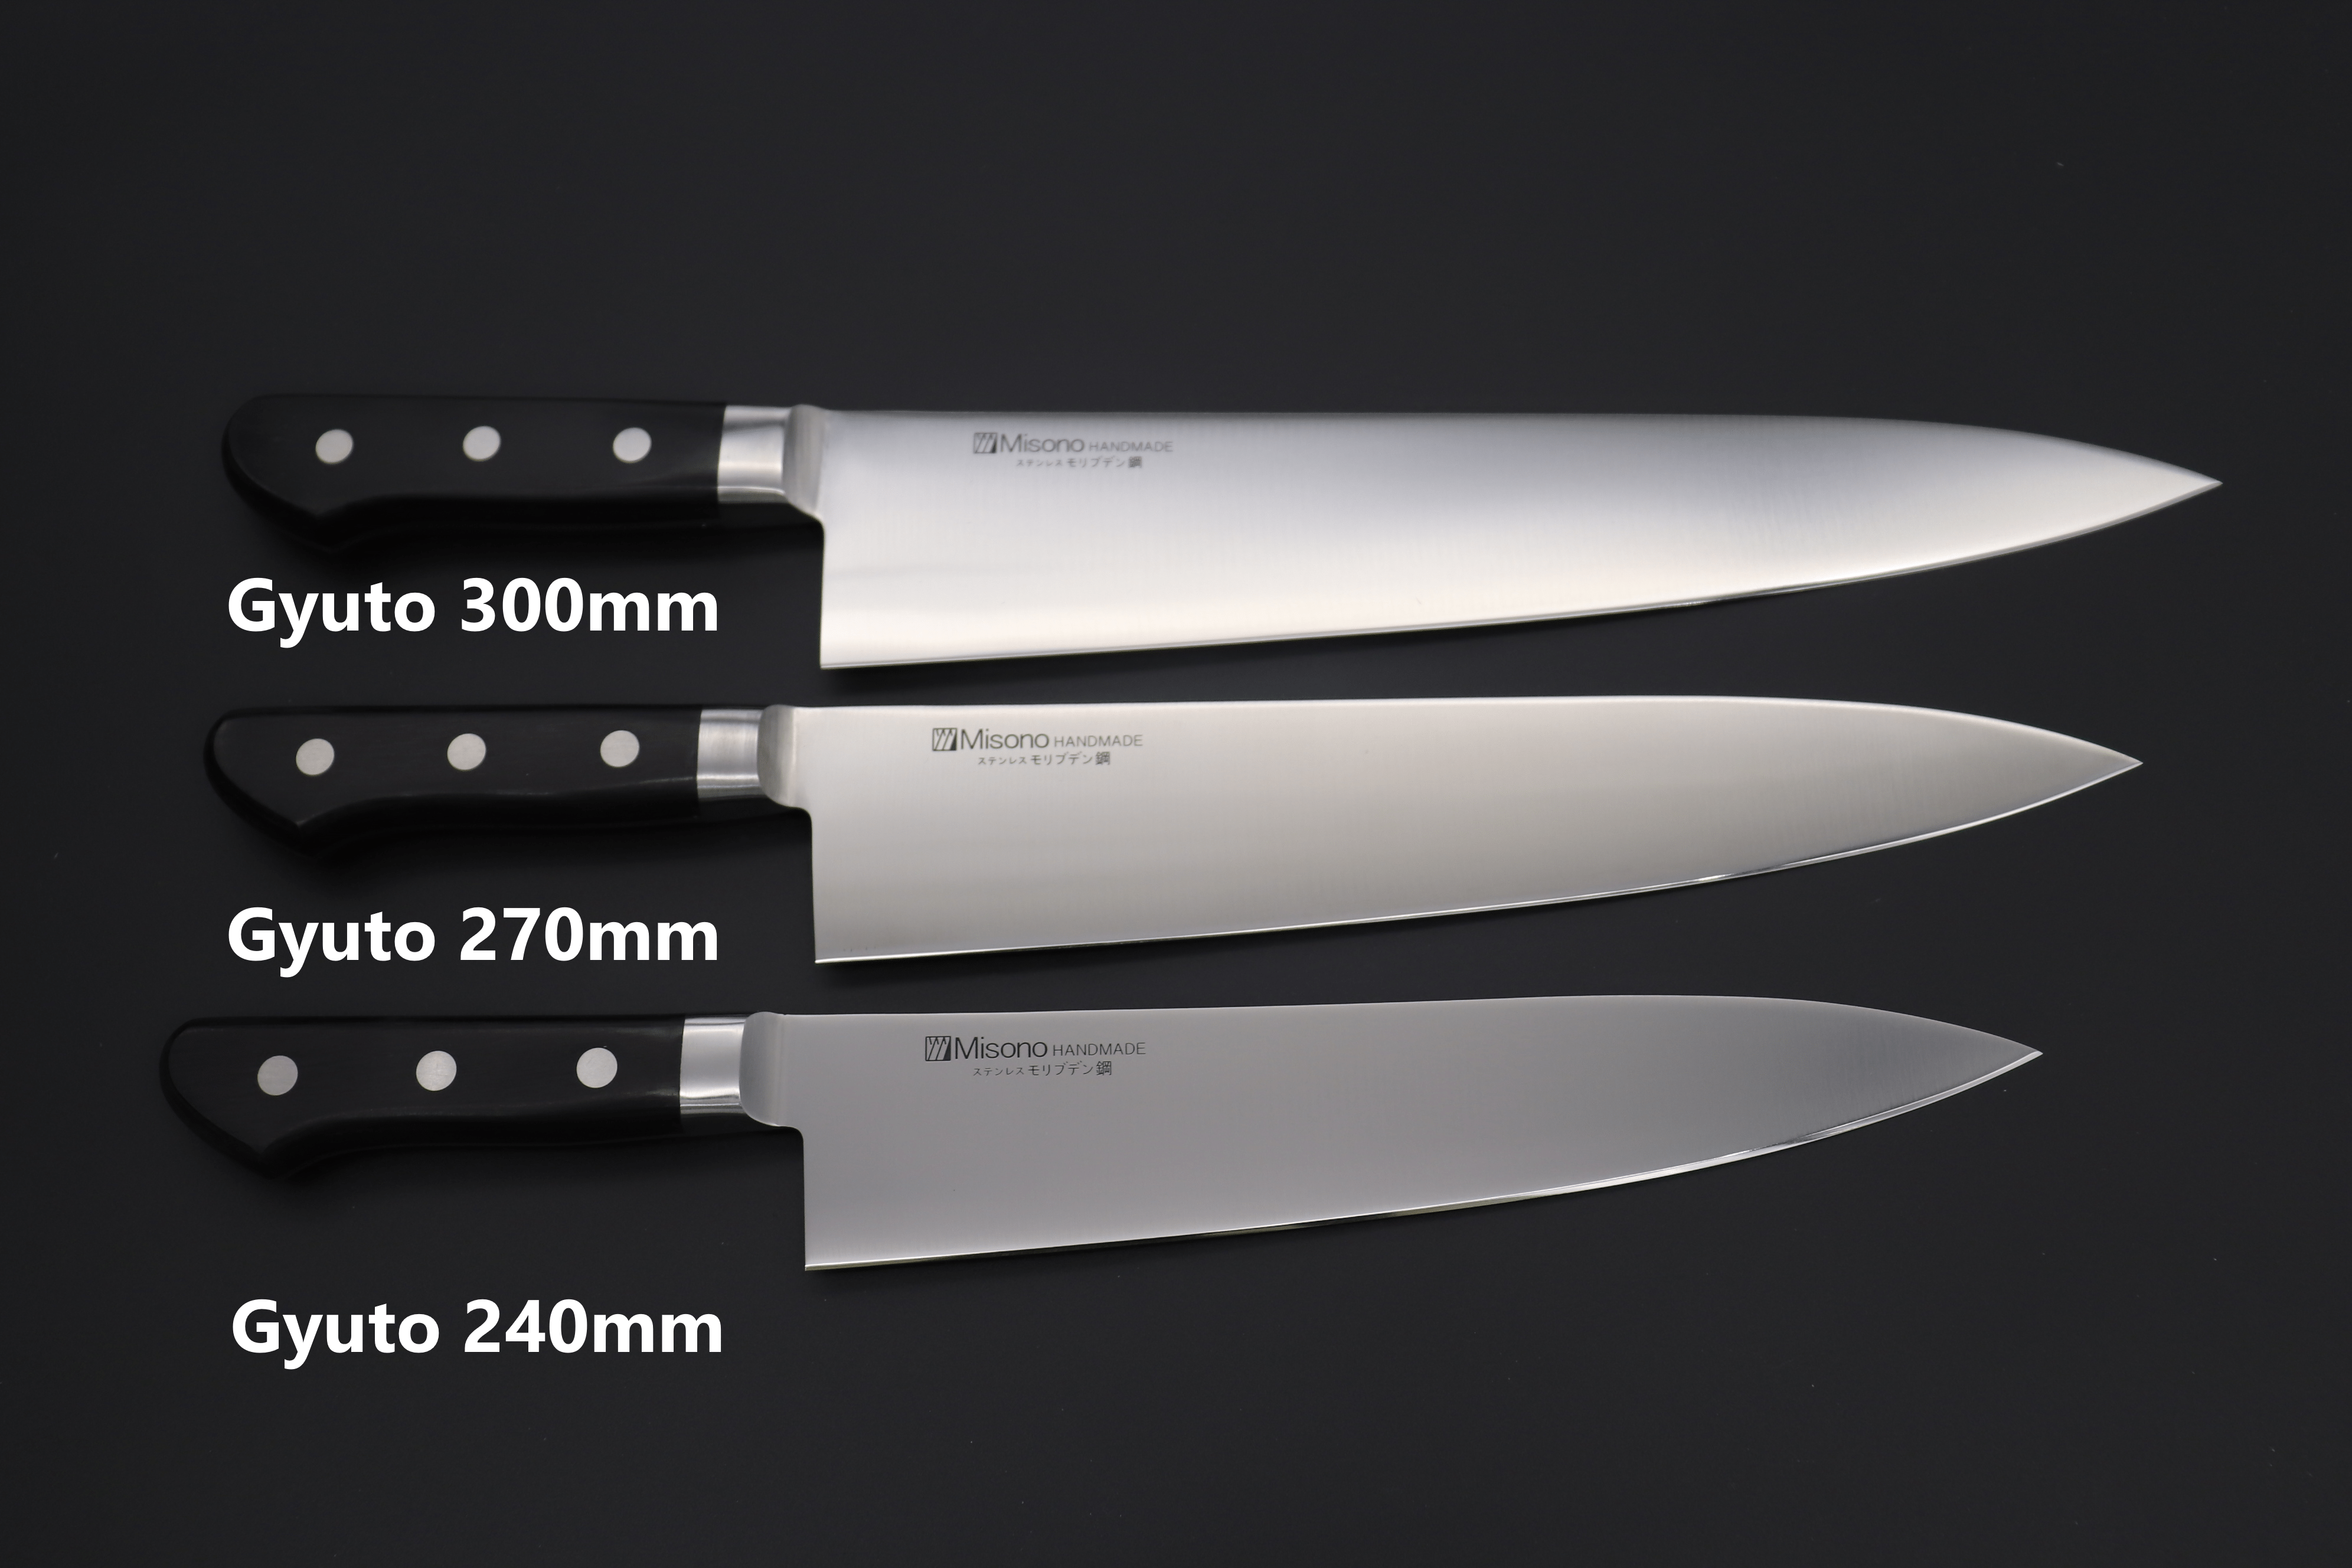  Chef's Knives